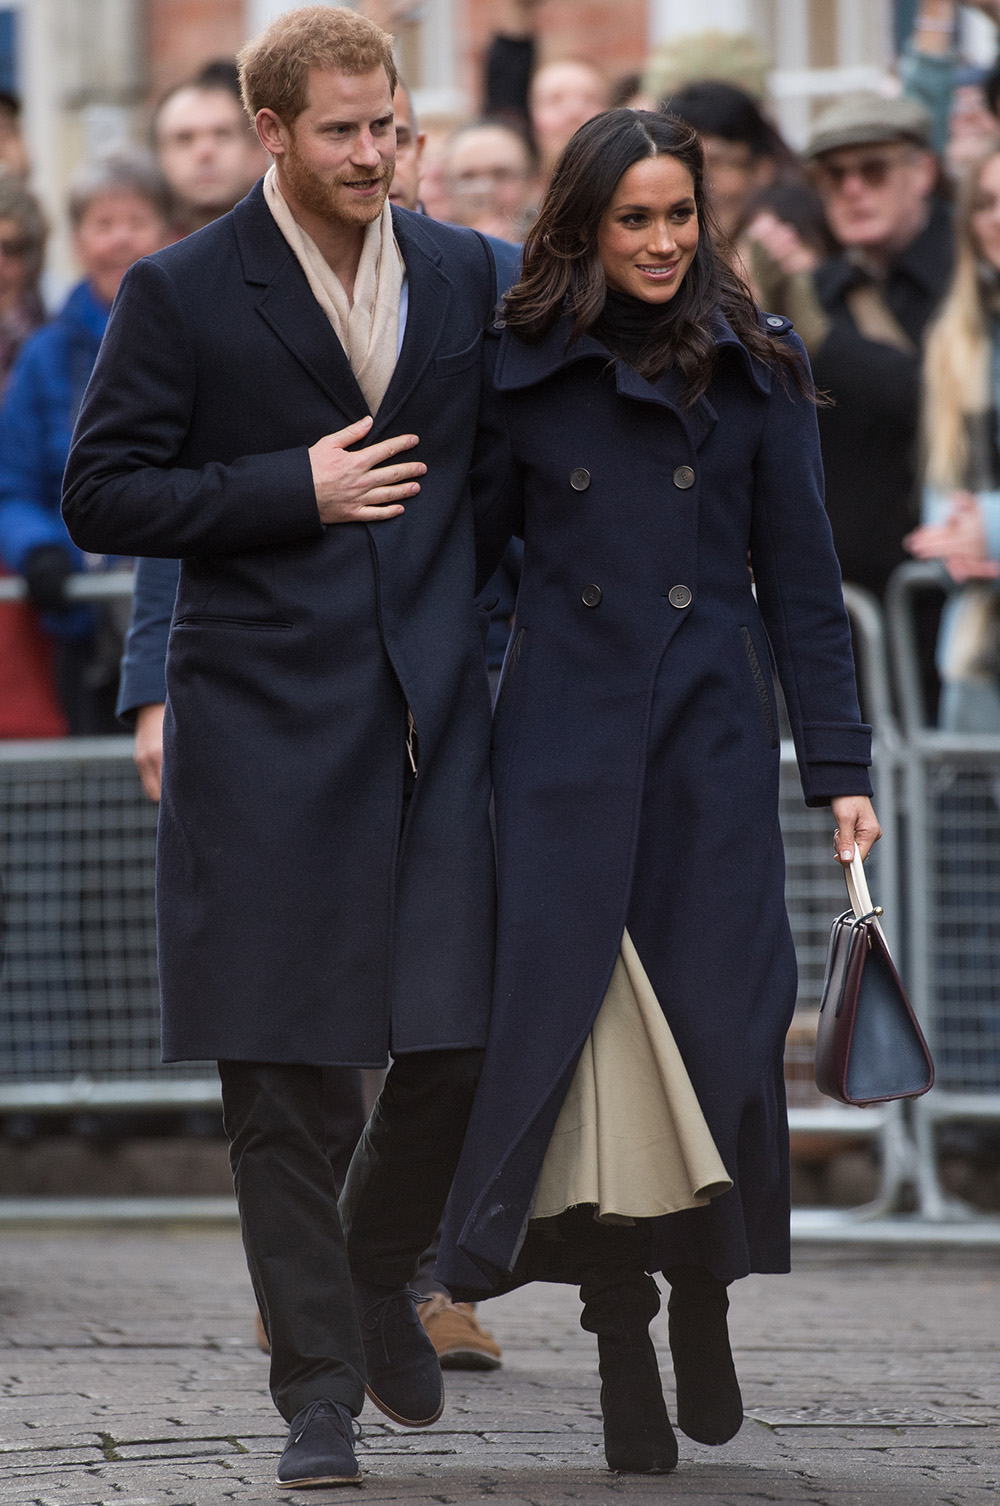 December 1, 2017: Looking chic and understated, Meghan wears a full-length cashmere mix double-breatsed navy coat from Canadian brand, Mackage, a beige Joseph skirt, burgundy tote bag from Scottish designer Strathberry and Kurt Geiger scrunch boots. Prince Harry and fiancee Meghan Markle attend the Terrence Higgins Trust World AIDS Day charity fair at Nottingham Contemporary in Nottingham, England